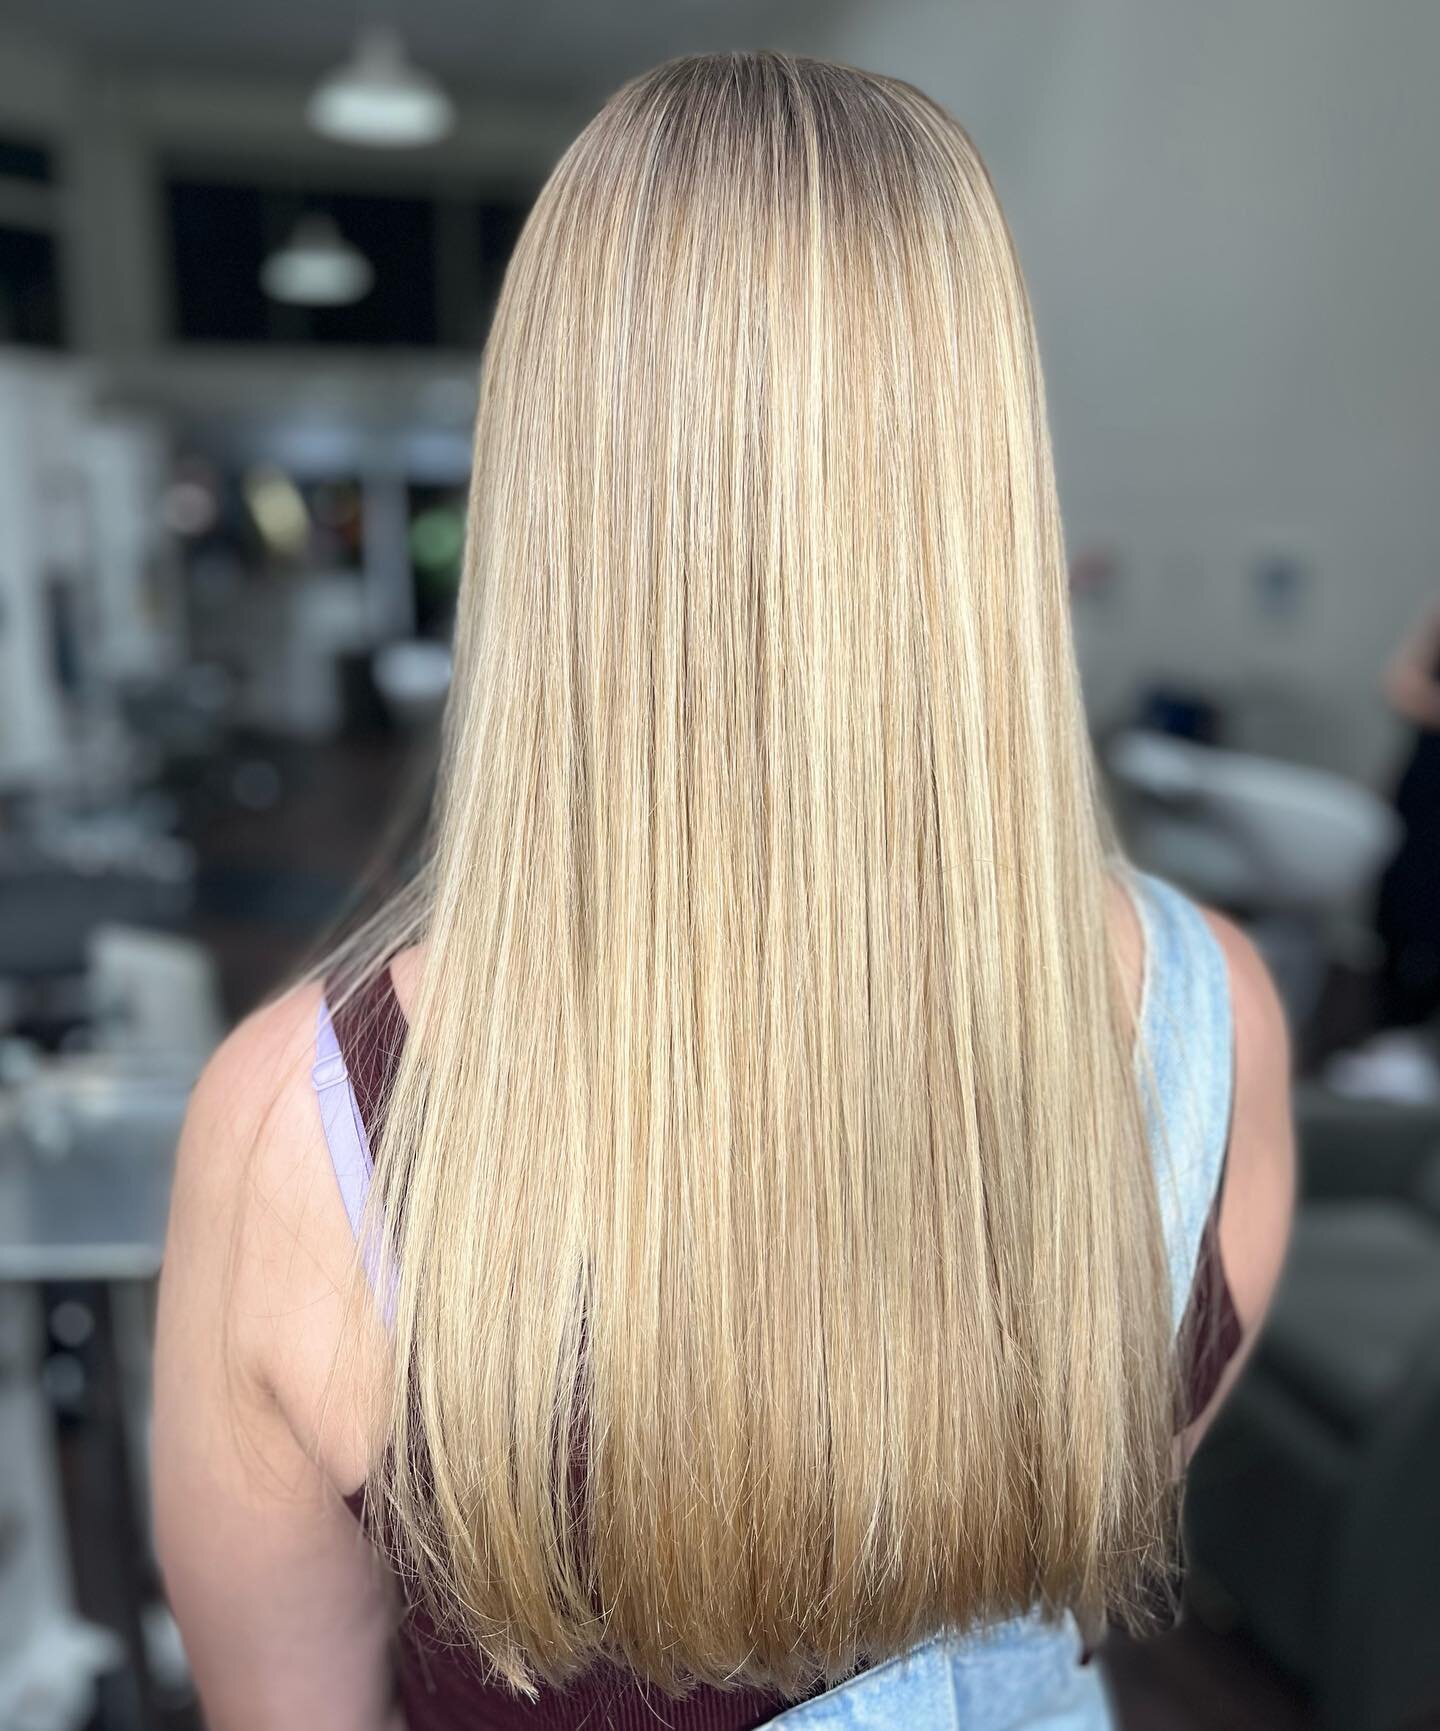 Blonding power house 💪
When a blonding transformation comes in at 4:30 we double team!!!
Mirroring our techniques and learning from one another was so fun 🤩 
I&rsquo;d love to do more of these collabs.
What do you think about us doing collective pr